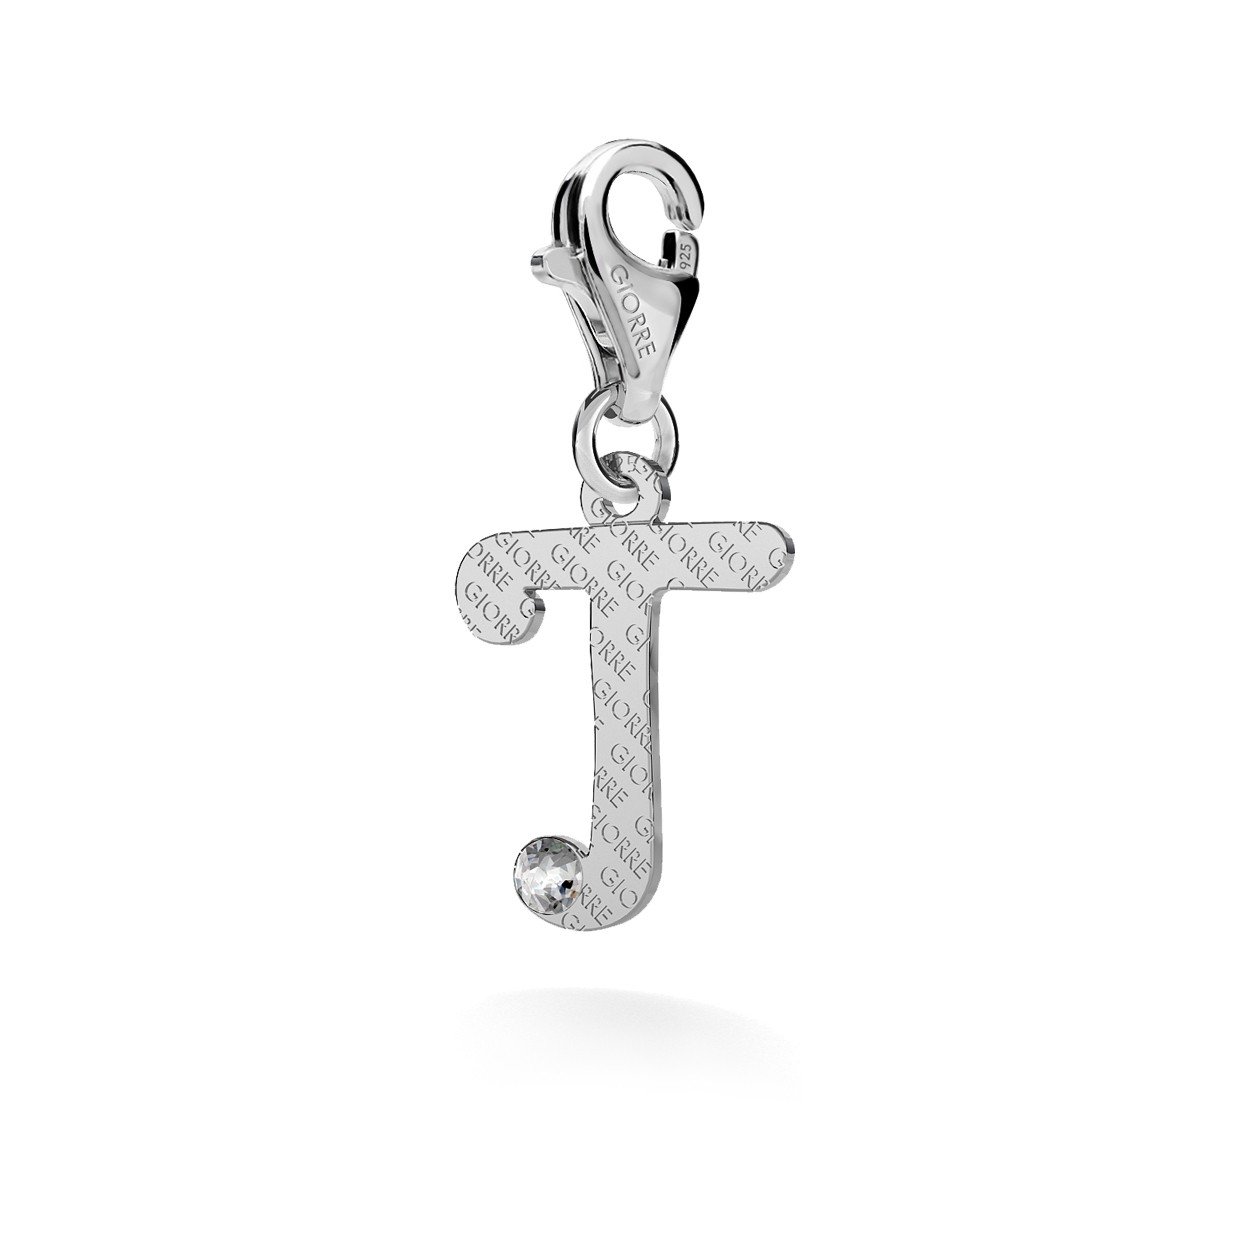 CHARM 28, LETTERS A - V, SILVER 925, RHODIUM OR GOLD PLATED